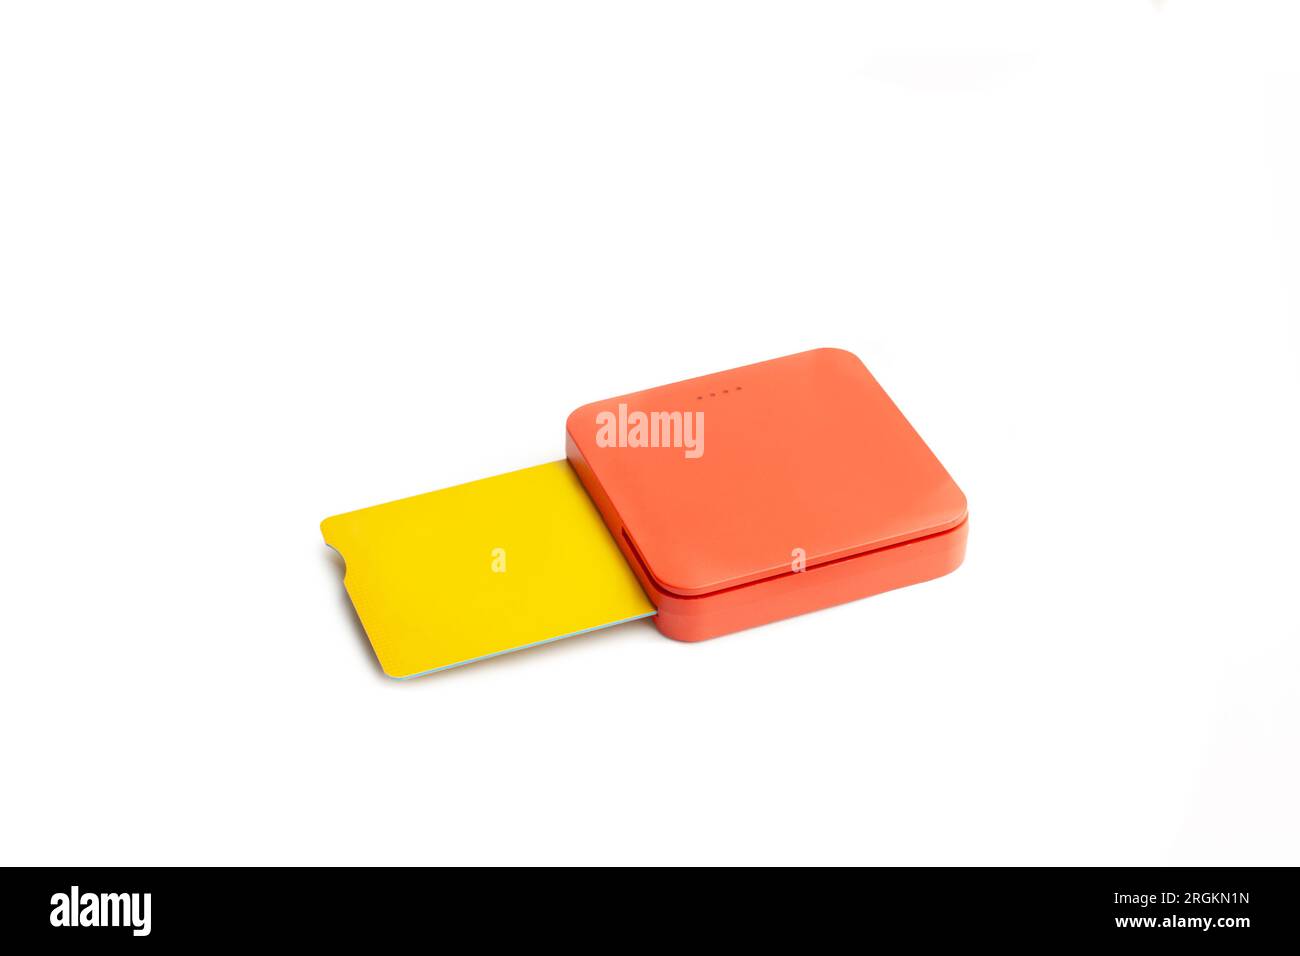 An orange card reader with a yellow credit card on a white background with copy space Stock Photo